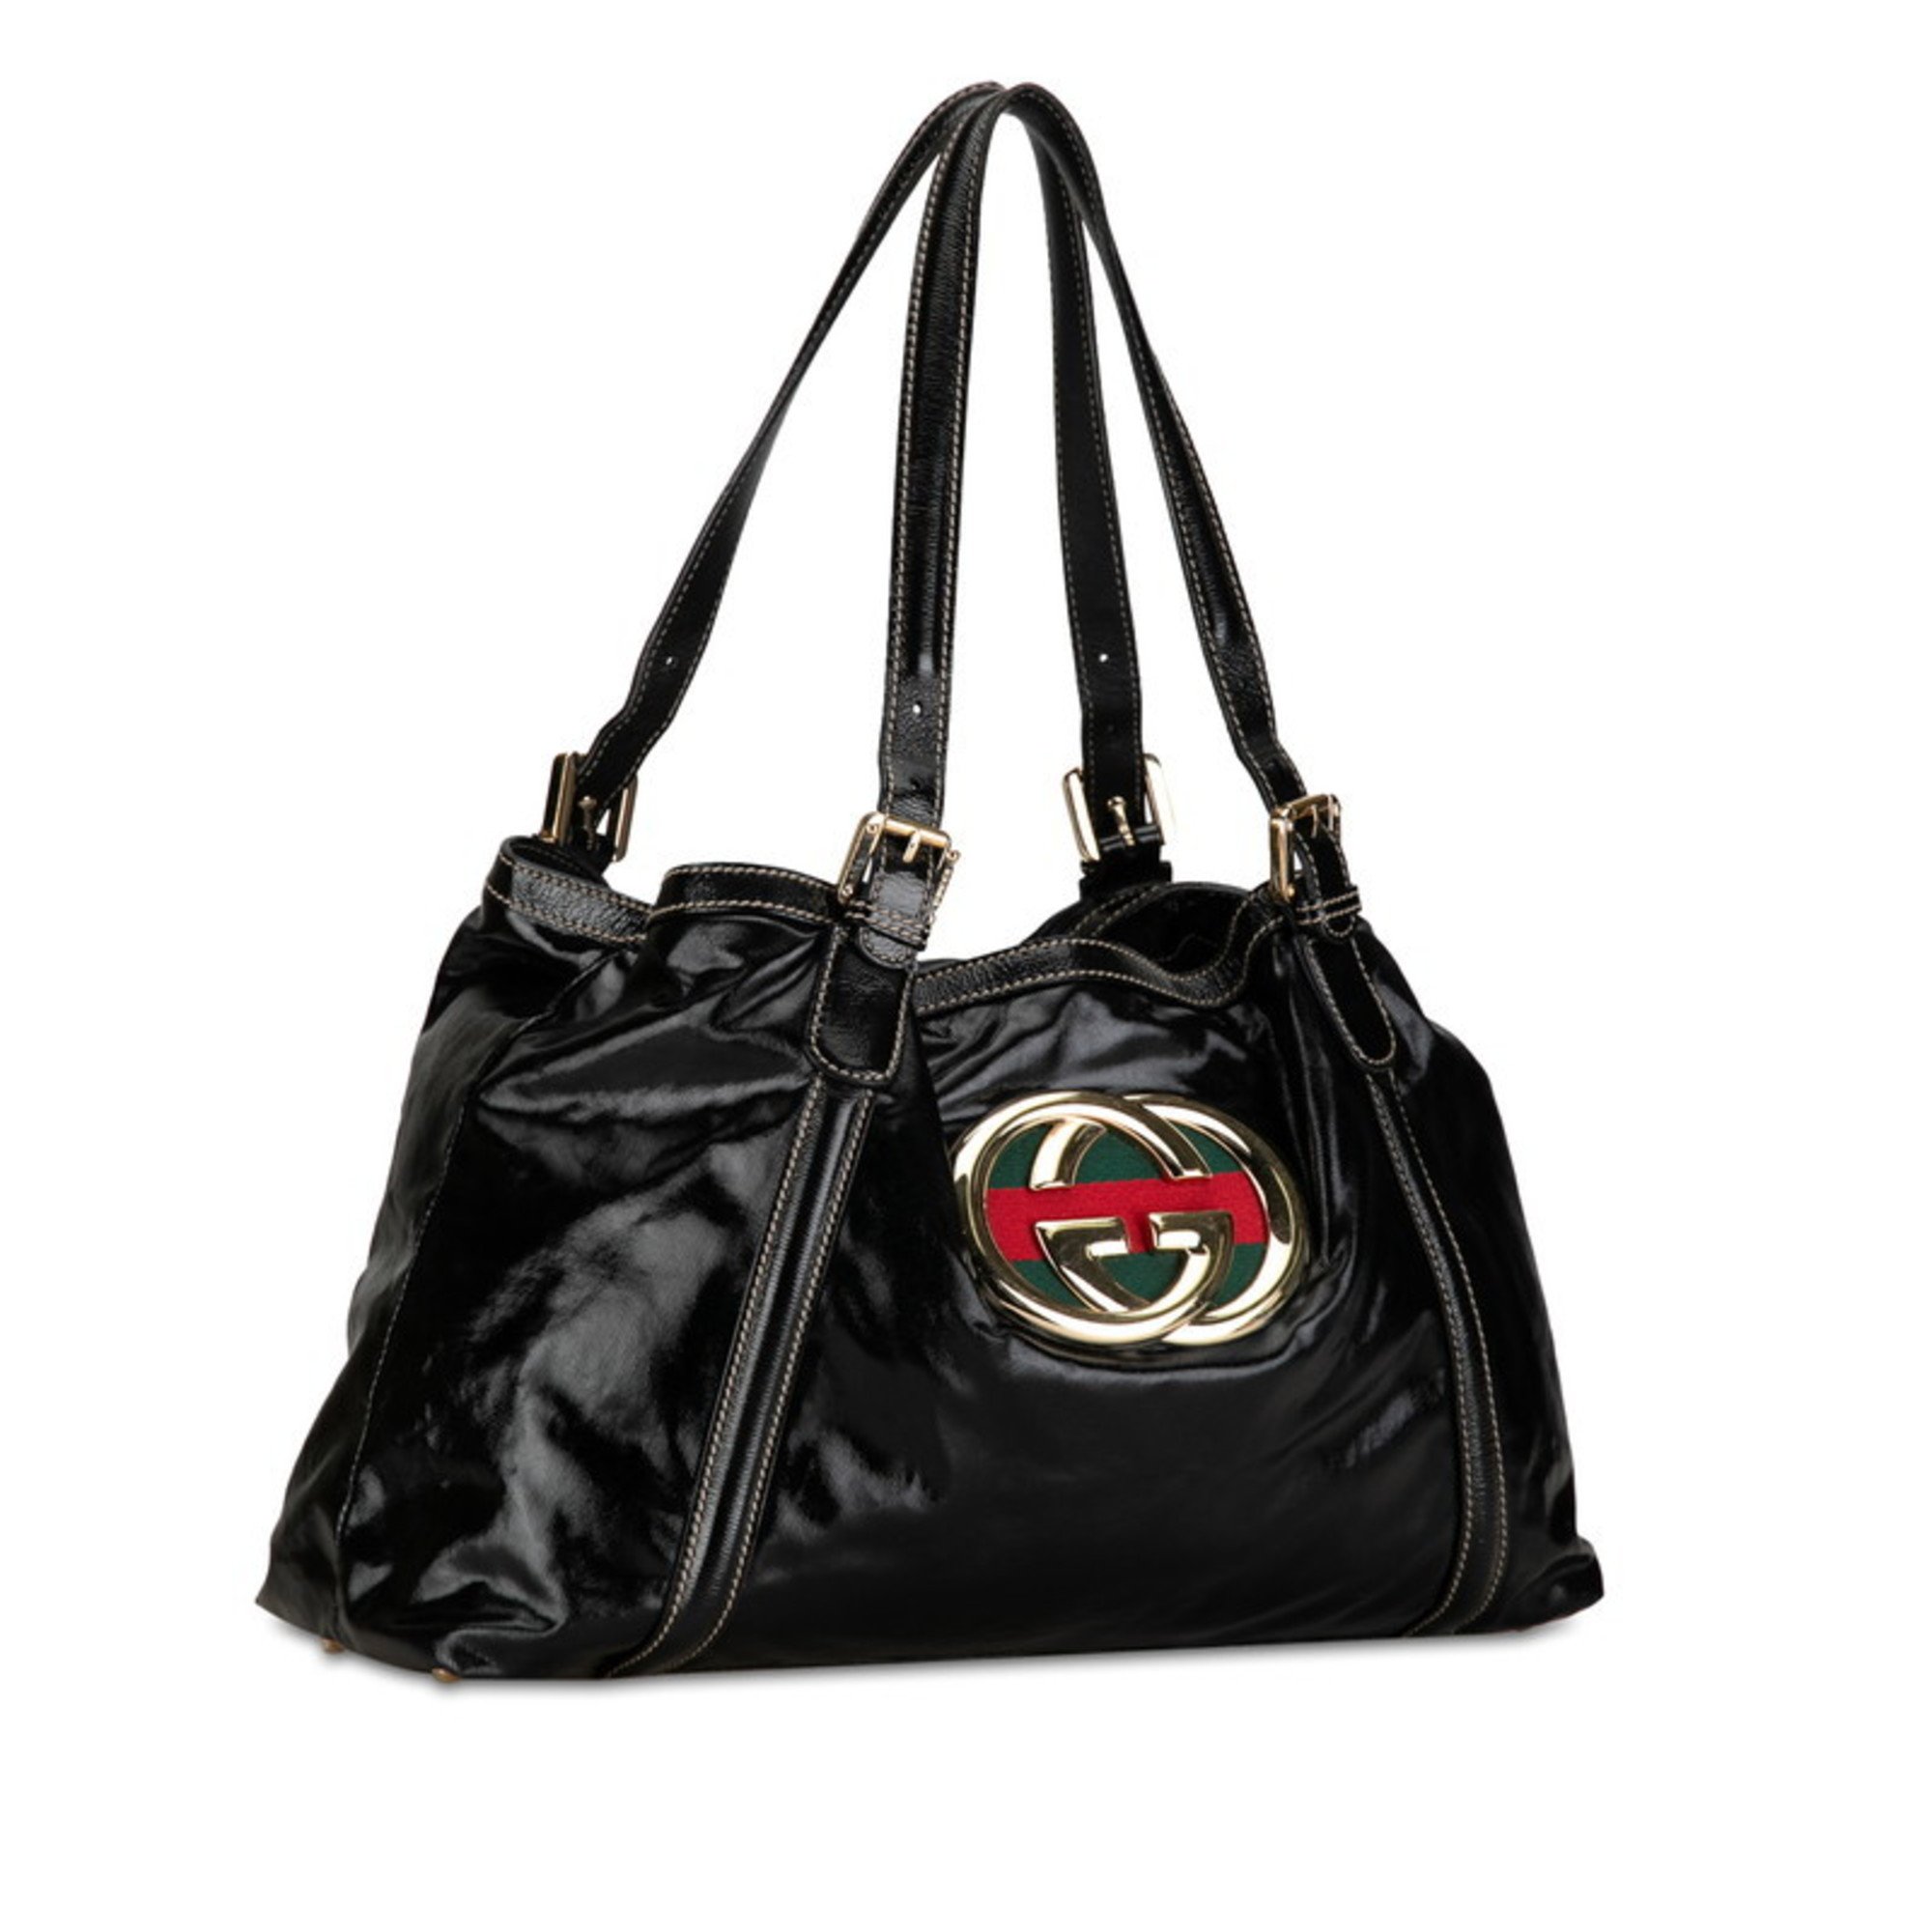 Gucci New Bride Double G Sherry Line Tote Bag 162094 Black Gold Patent Leather Women's GUCCI